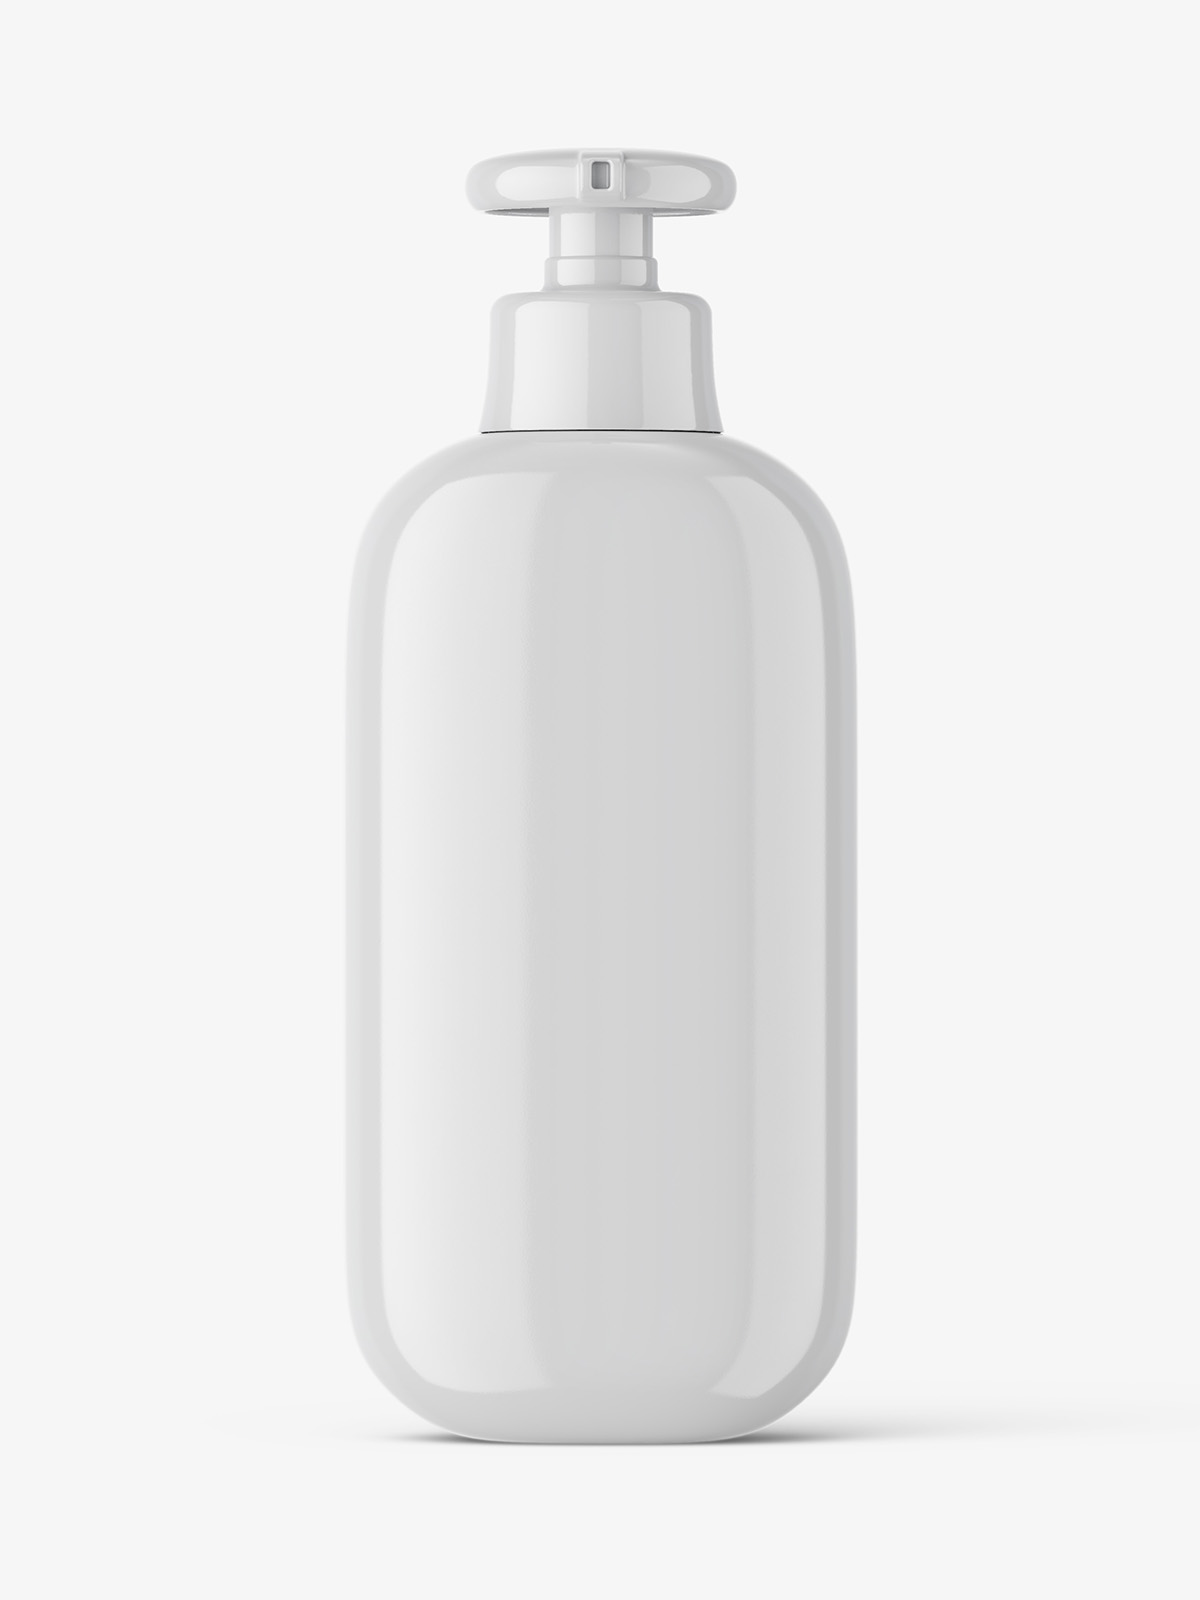 Glossy cosmetic bottle with pump mockup - Smarty Mockups